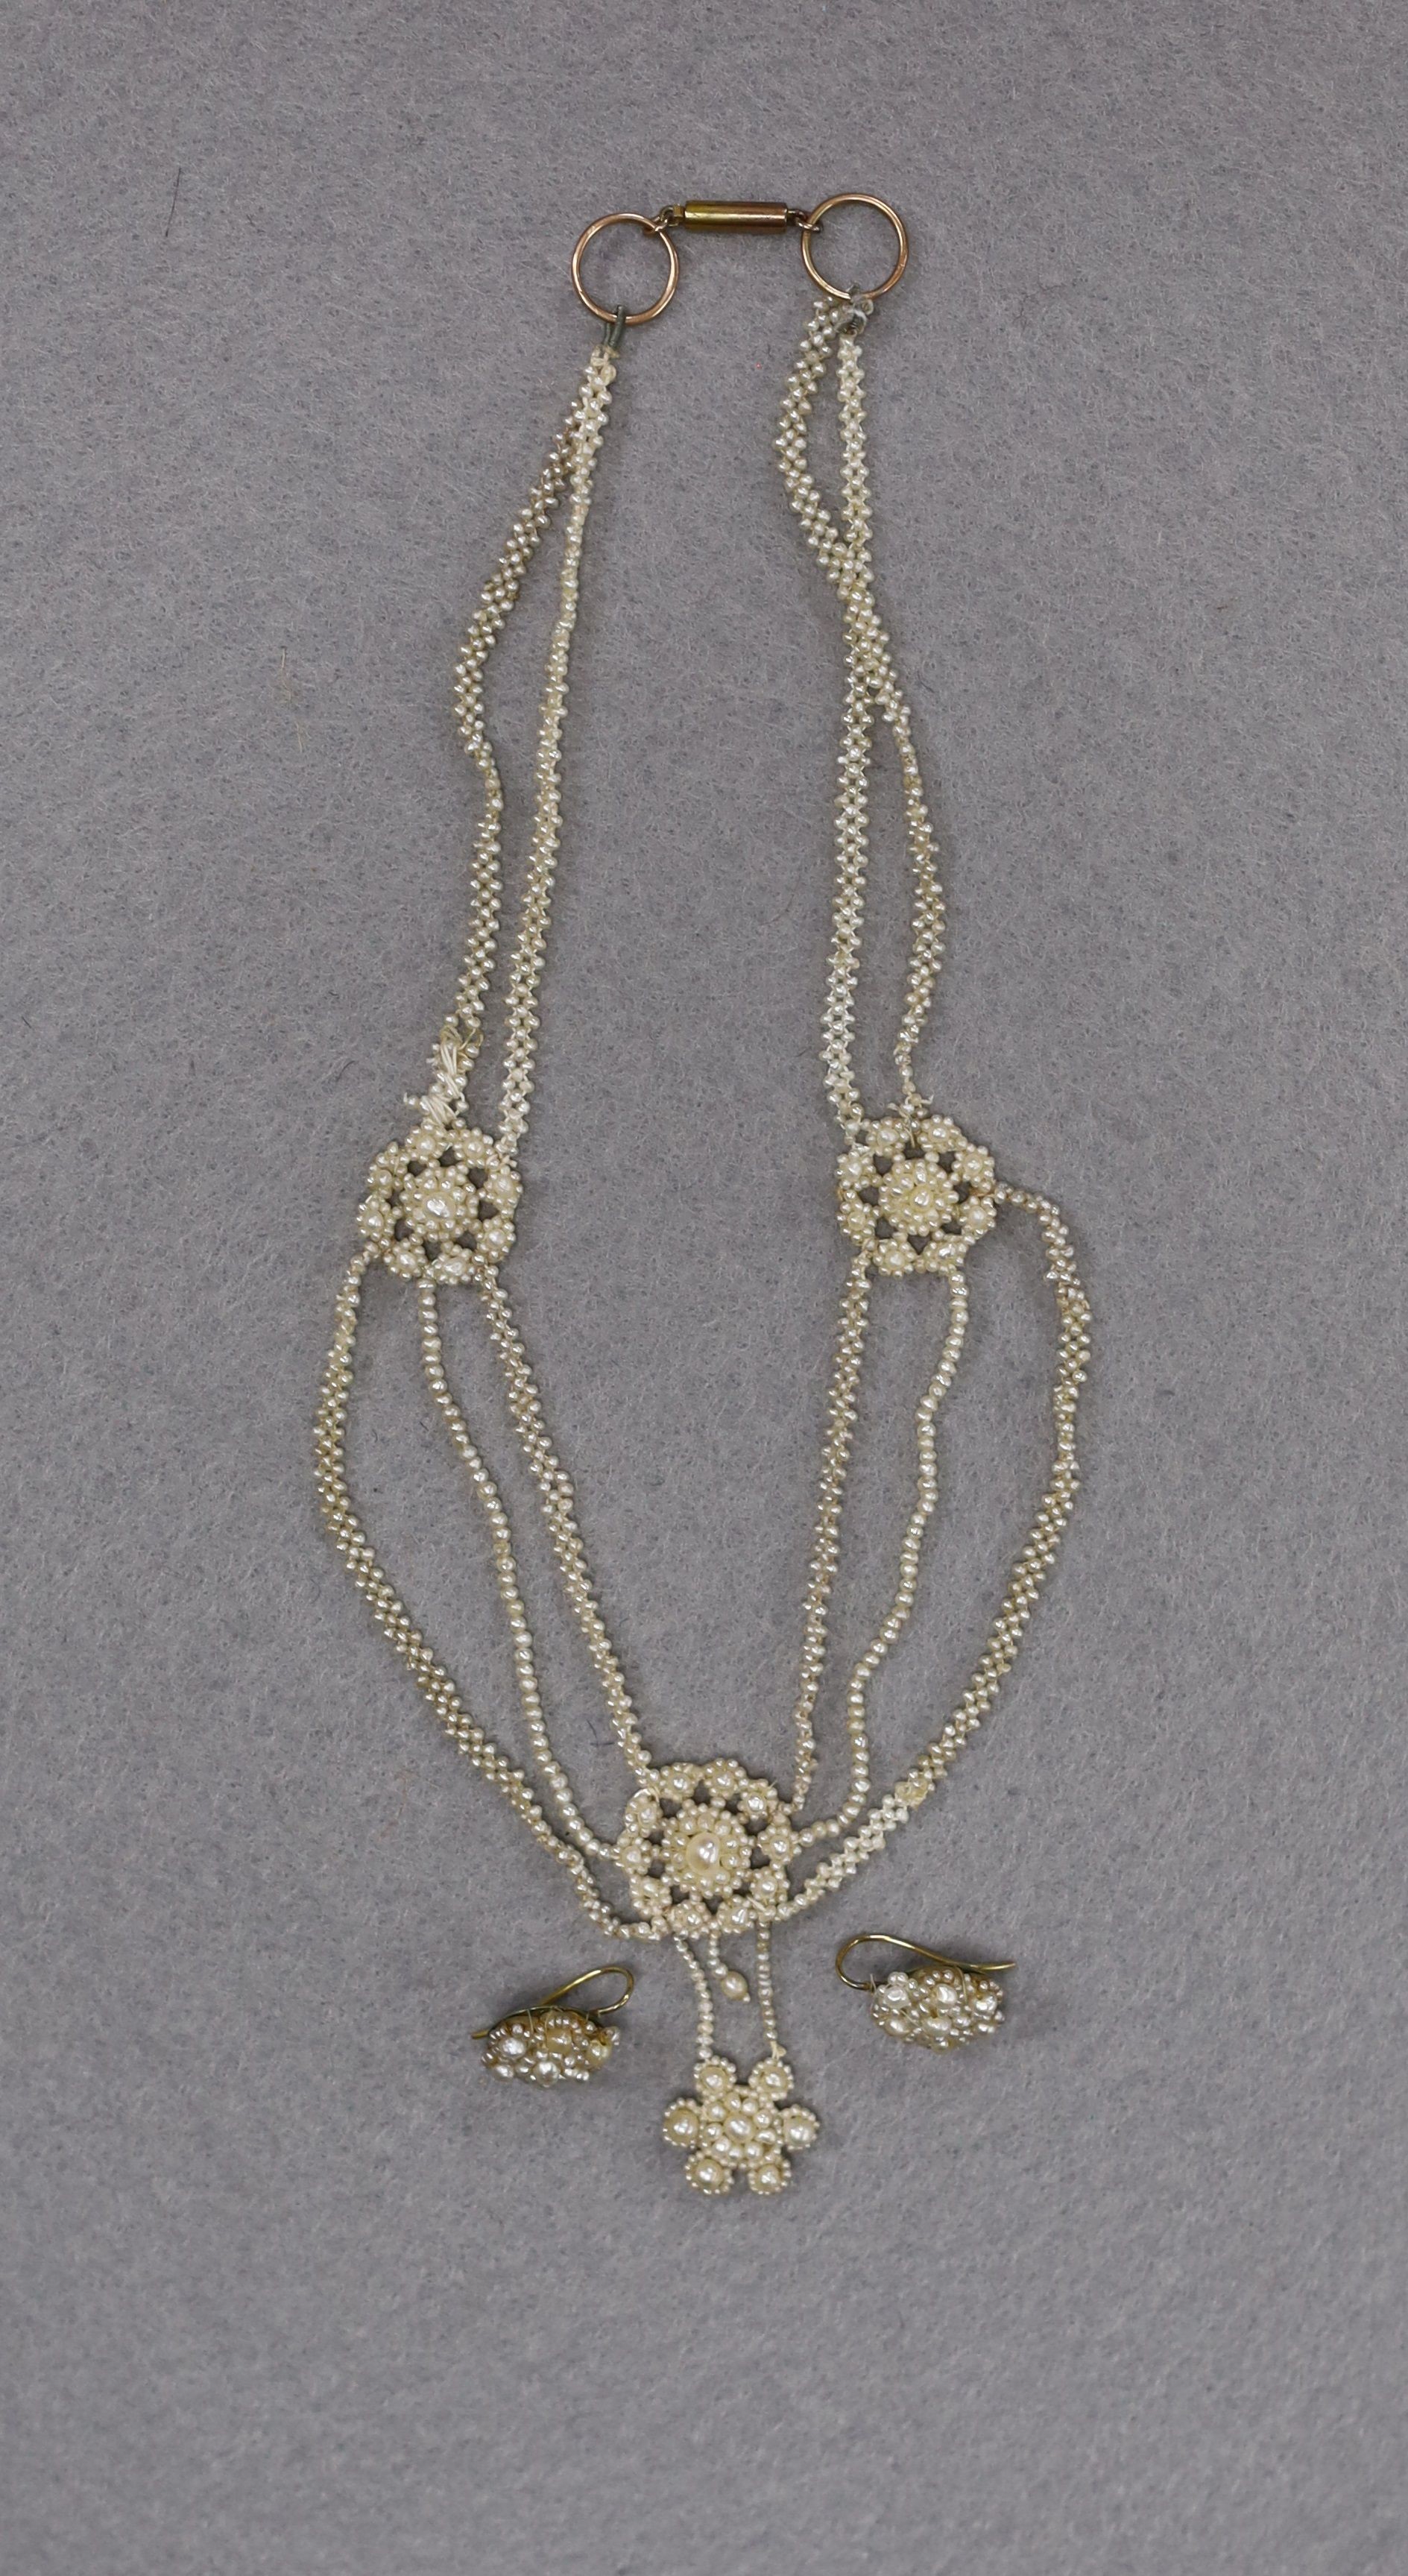 A 19th century multi strand seed pearl necklace, 40cm and a pair of similar earrings.